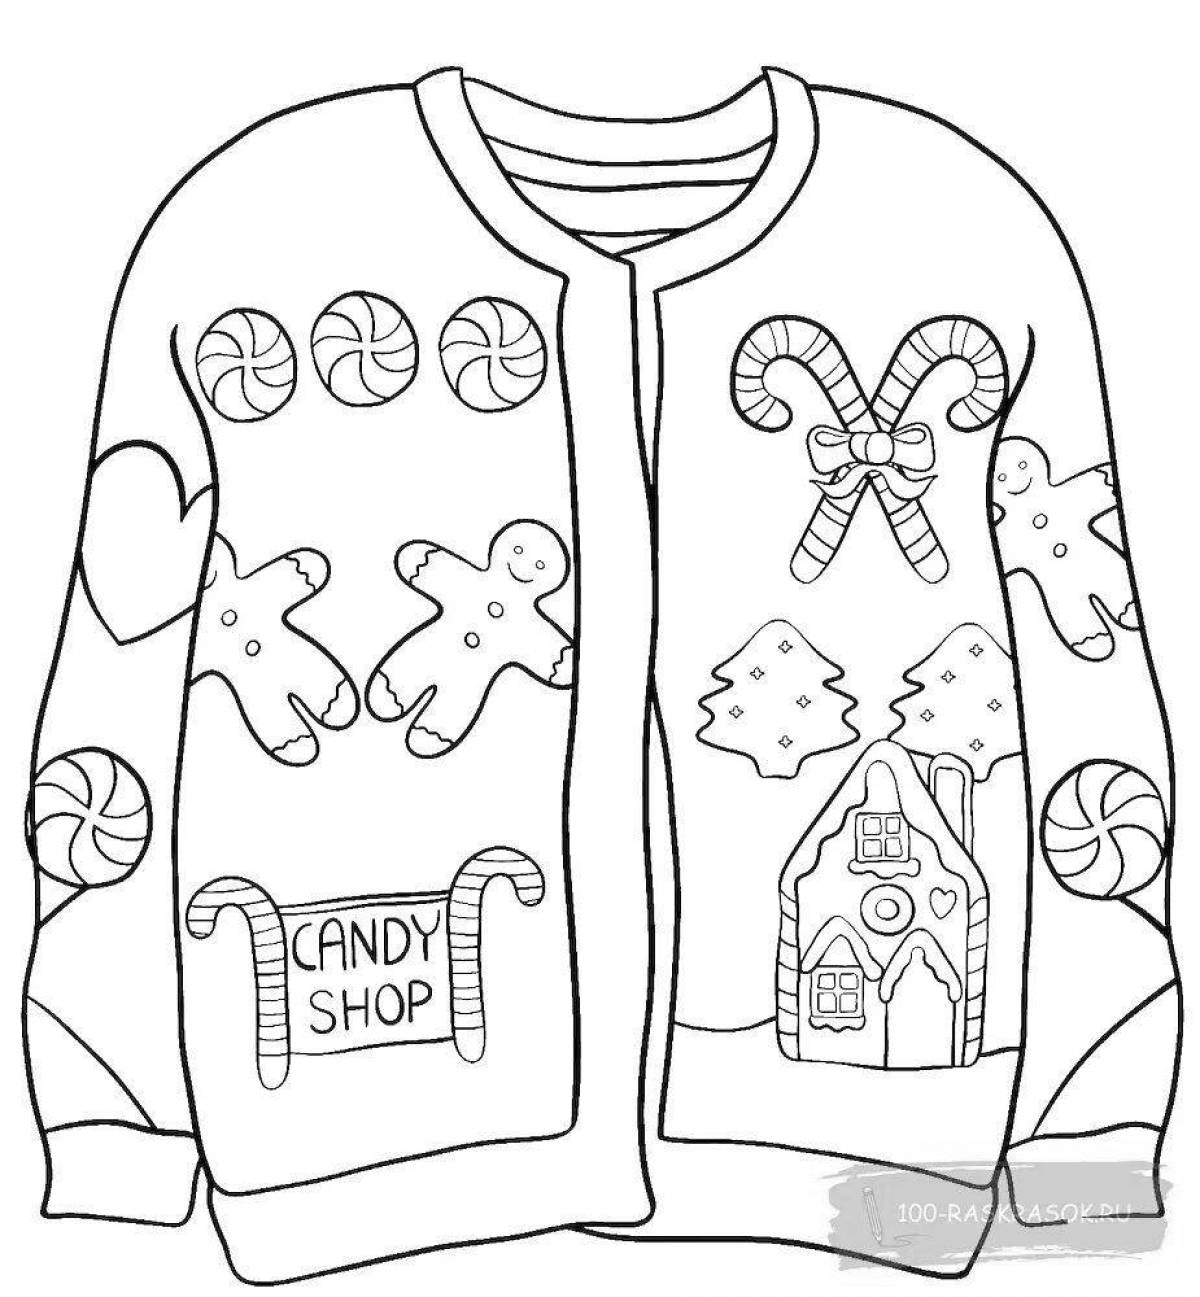 Attractive sweater coloring for 4-5 year olds